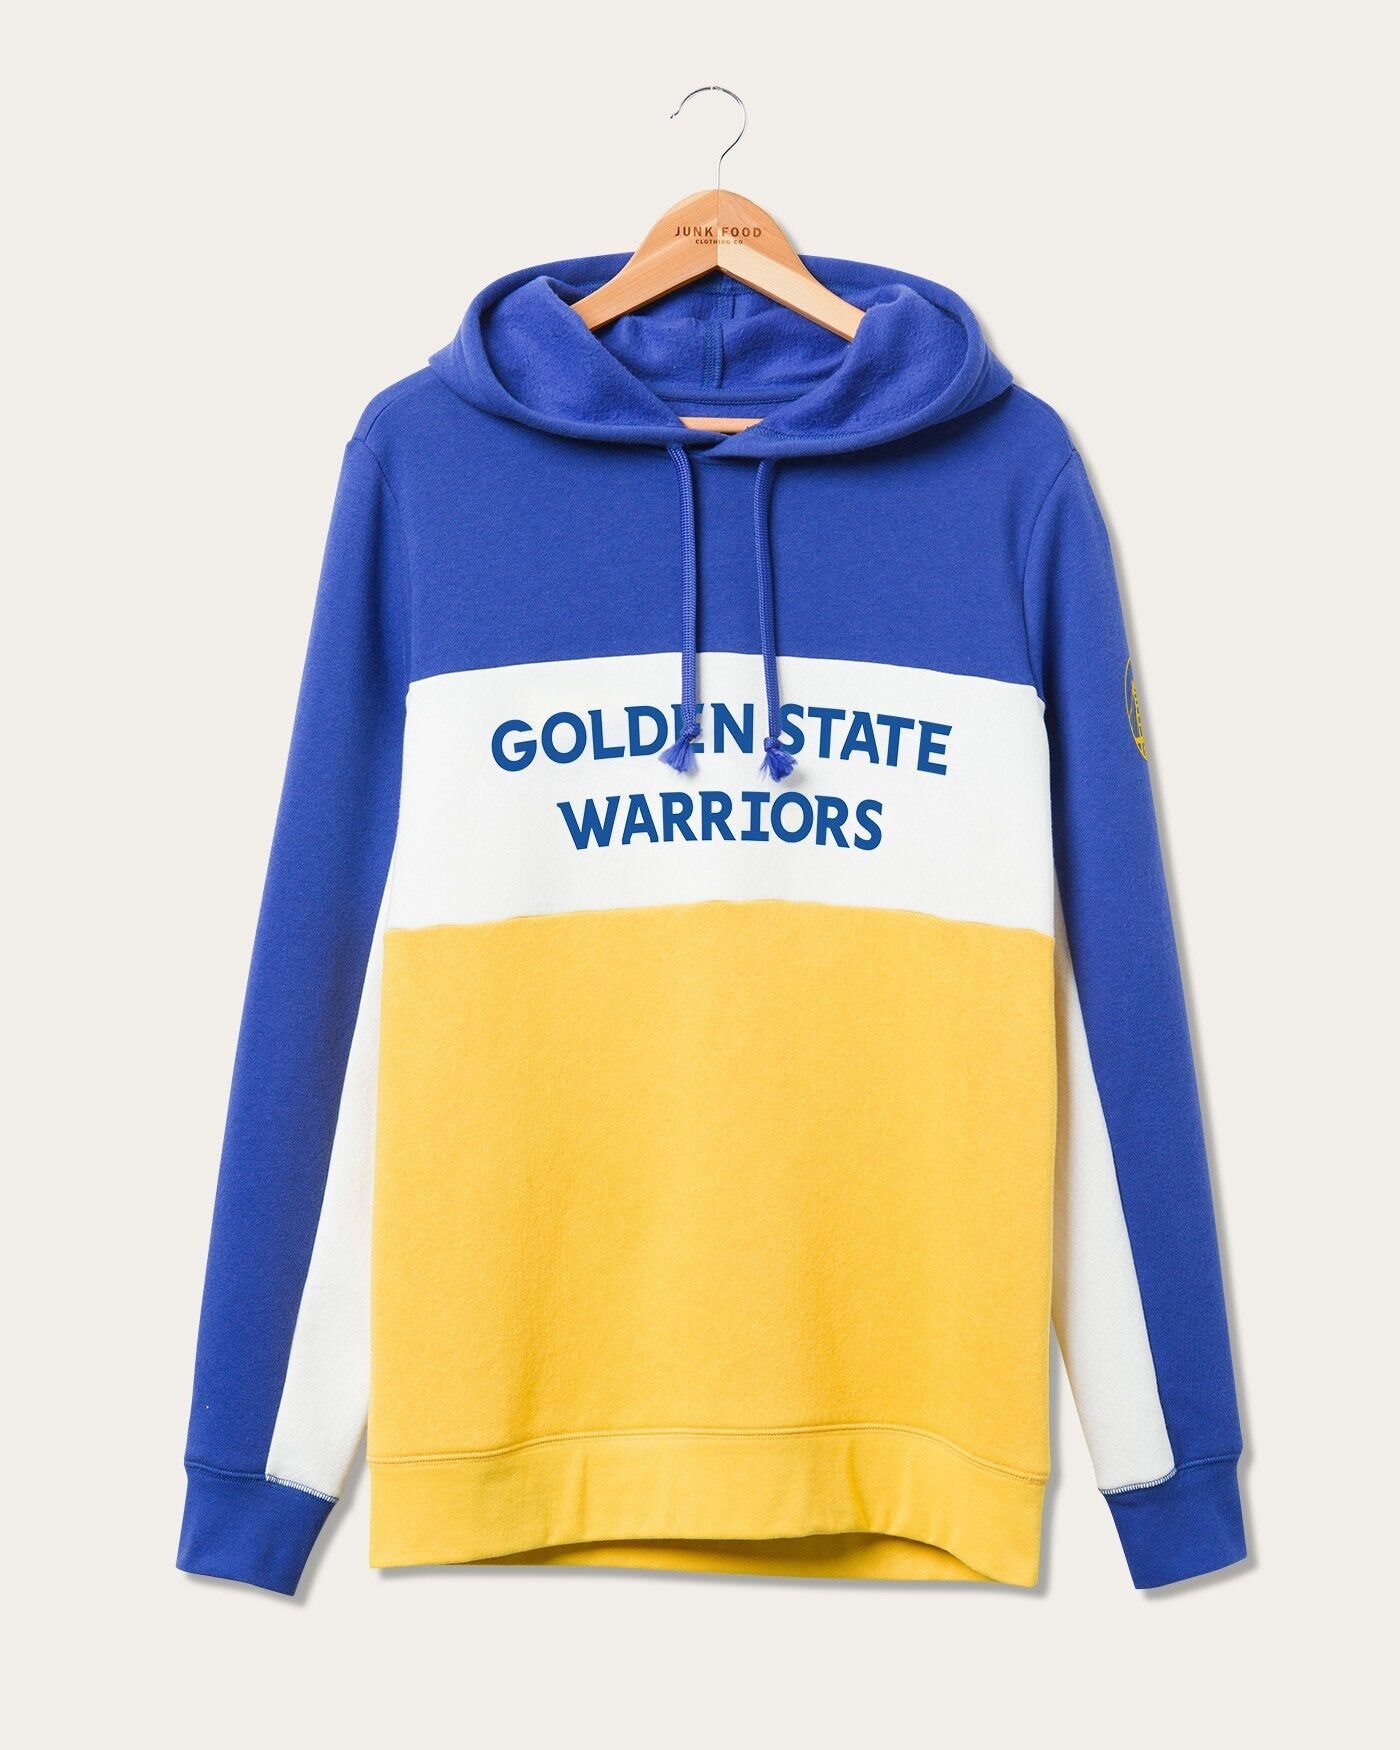 Junk Food Clothing NBA Golden State Warriors Colorblock Hoodie Small male